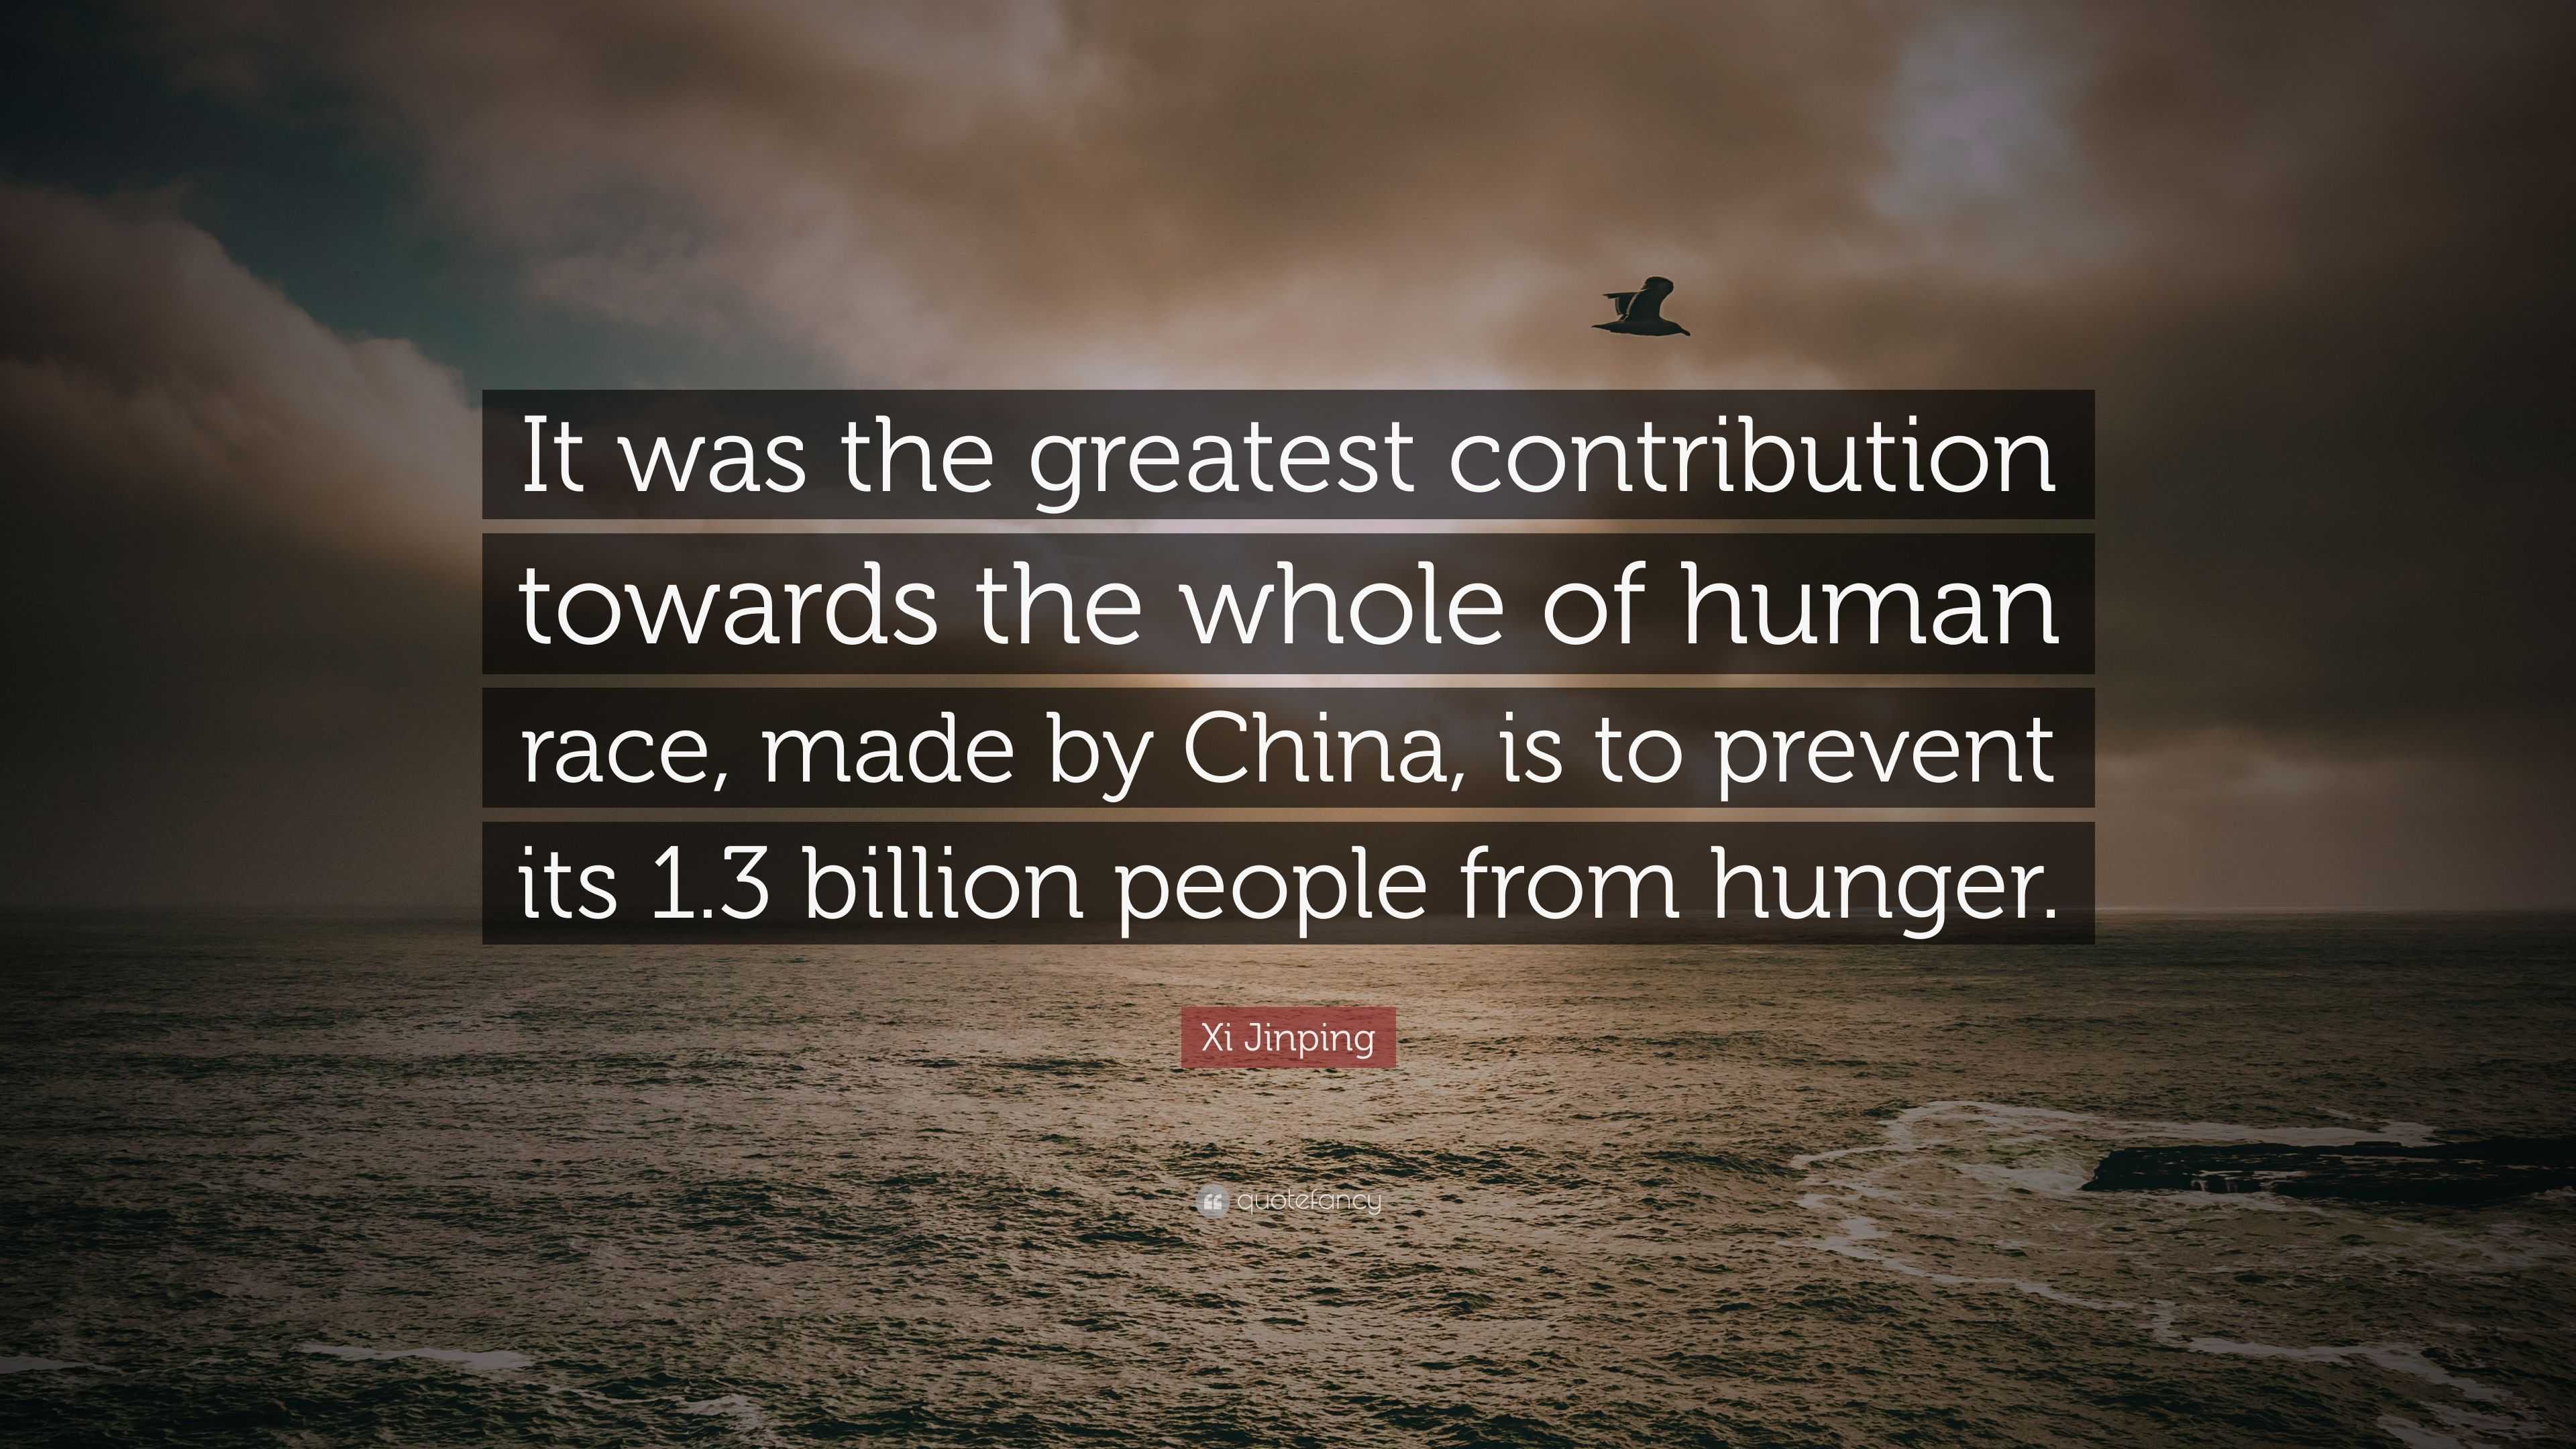 Xi Jinping Quote: “It was the greatest contribution towards the whole